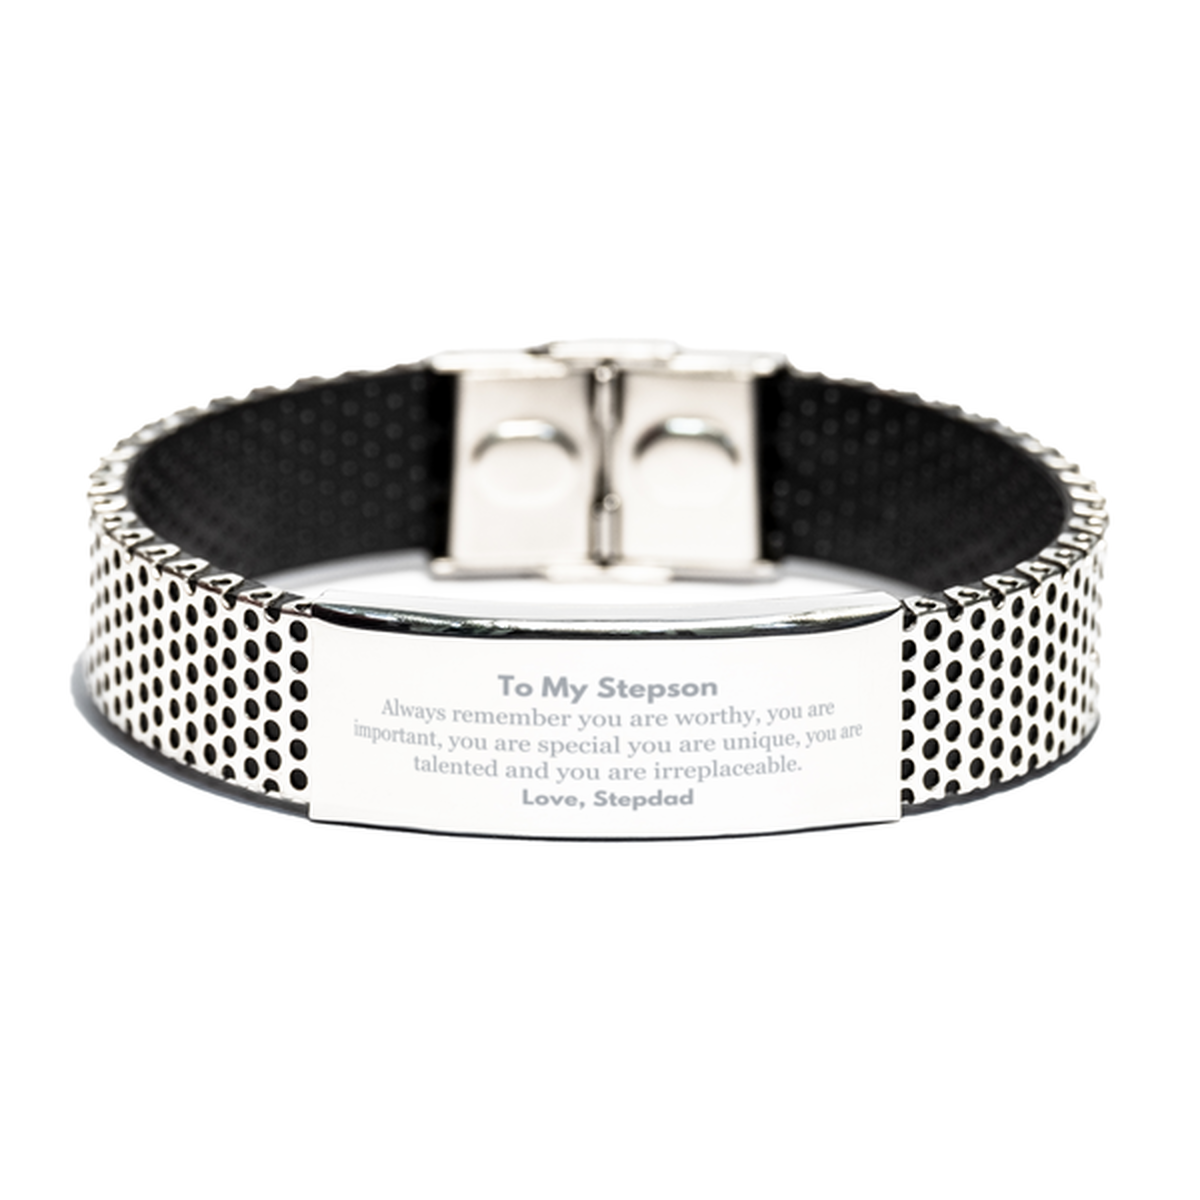 Stepson Birthday Gifts from Stepdad, Inspirational Stainless Steel Bracelet for Stepson Christmas Graduation Gifts for Stepson Always remember you are worthy, you are important. Love, Stepdad